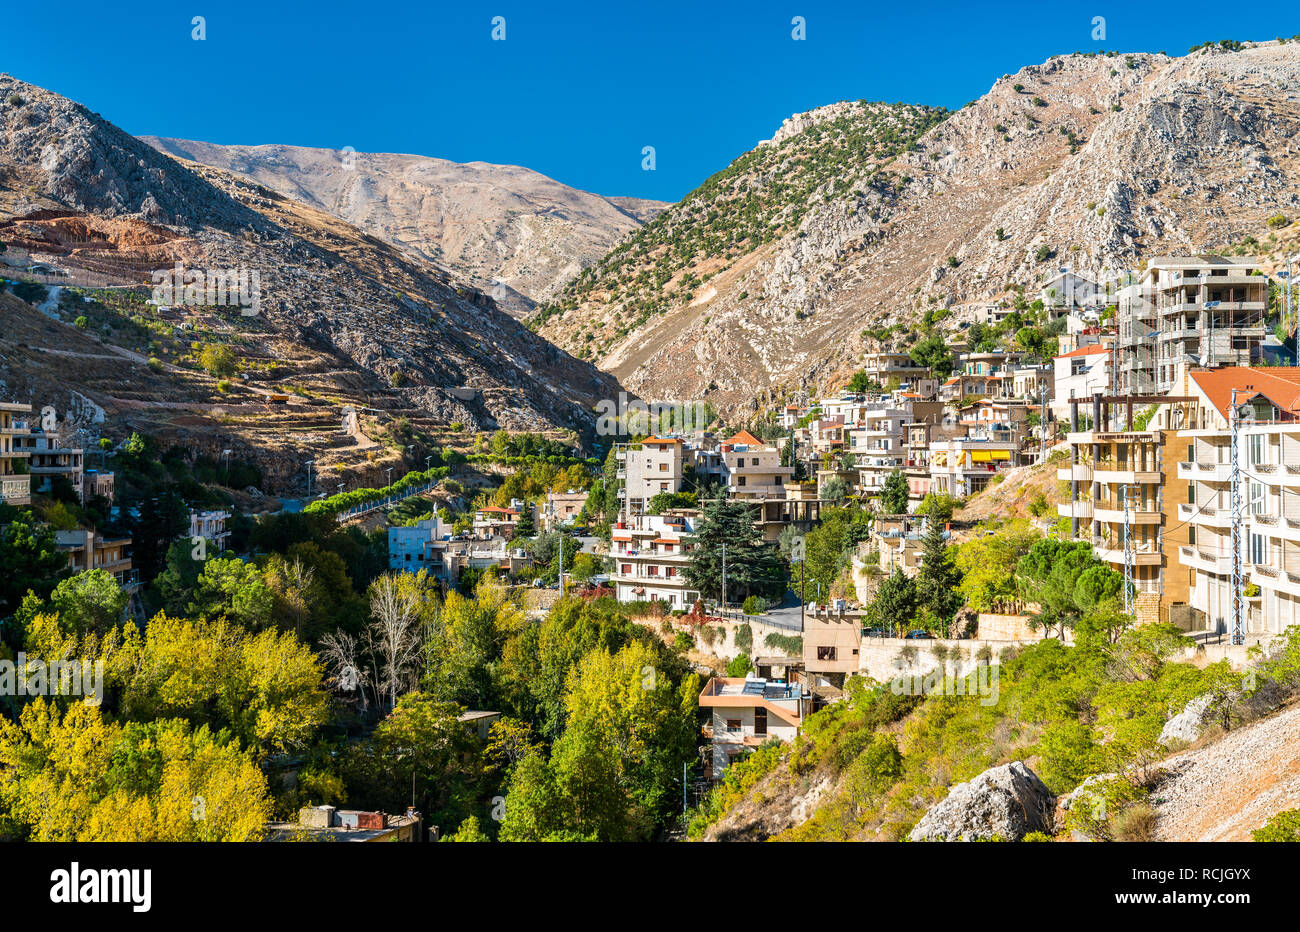 View of Zahle, the capital of Beqaa Governorate of Lebanon Stock Photo